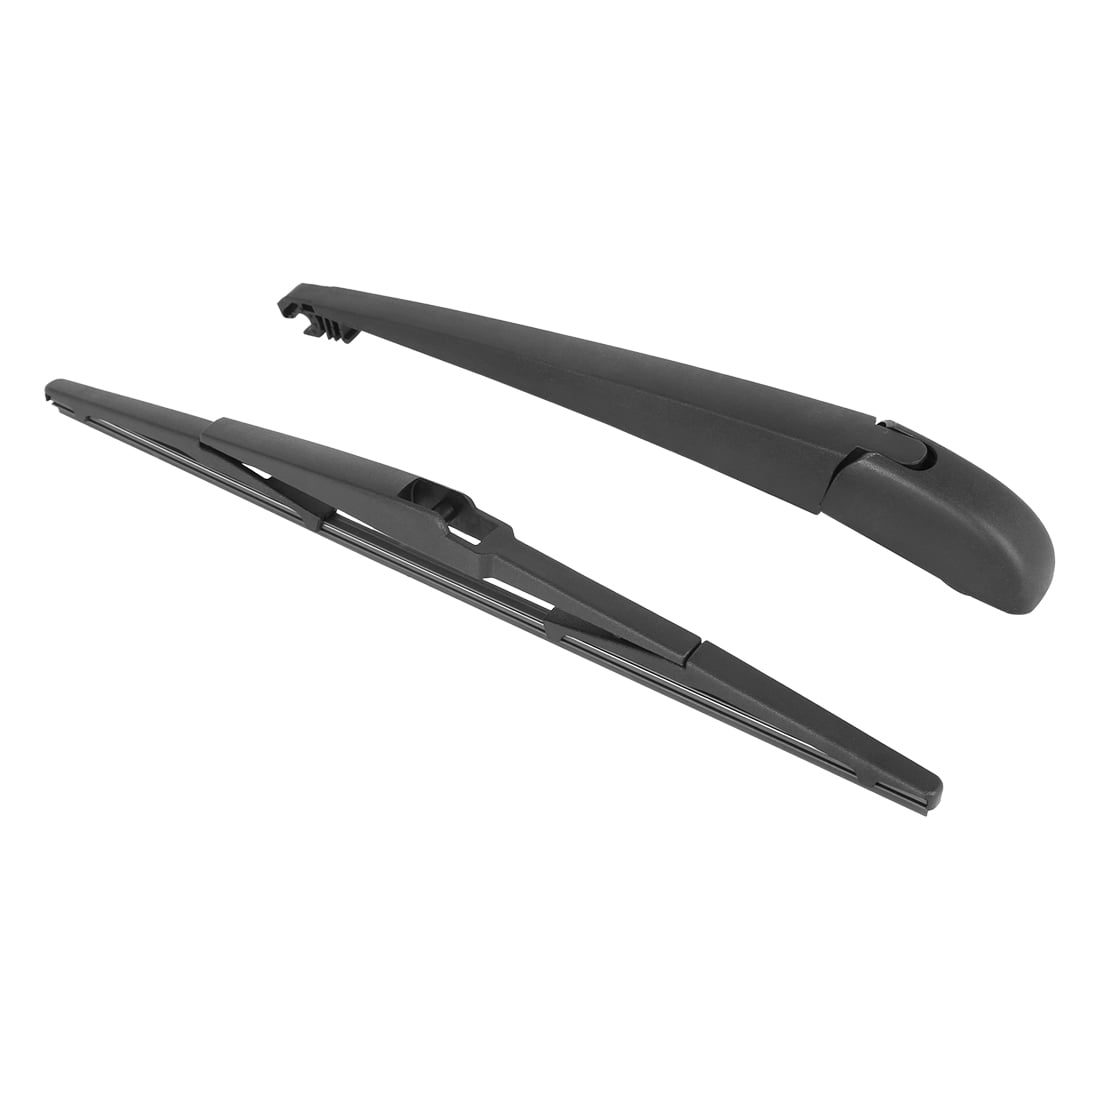 2019 Jeep Cherokee Rear Wiper Blade Replacement